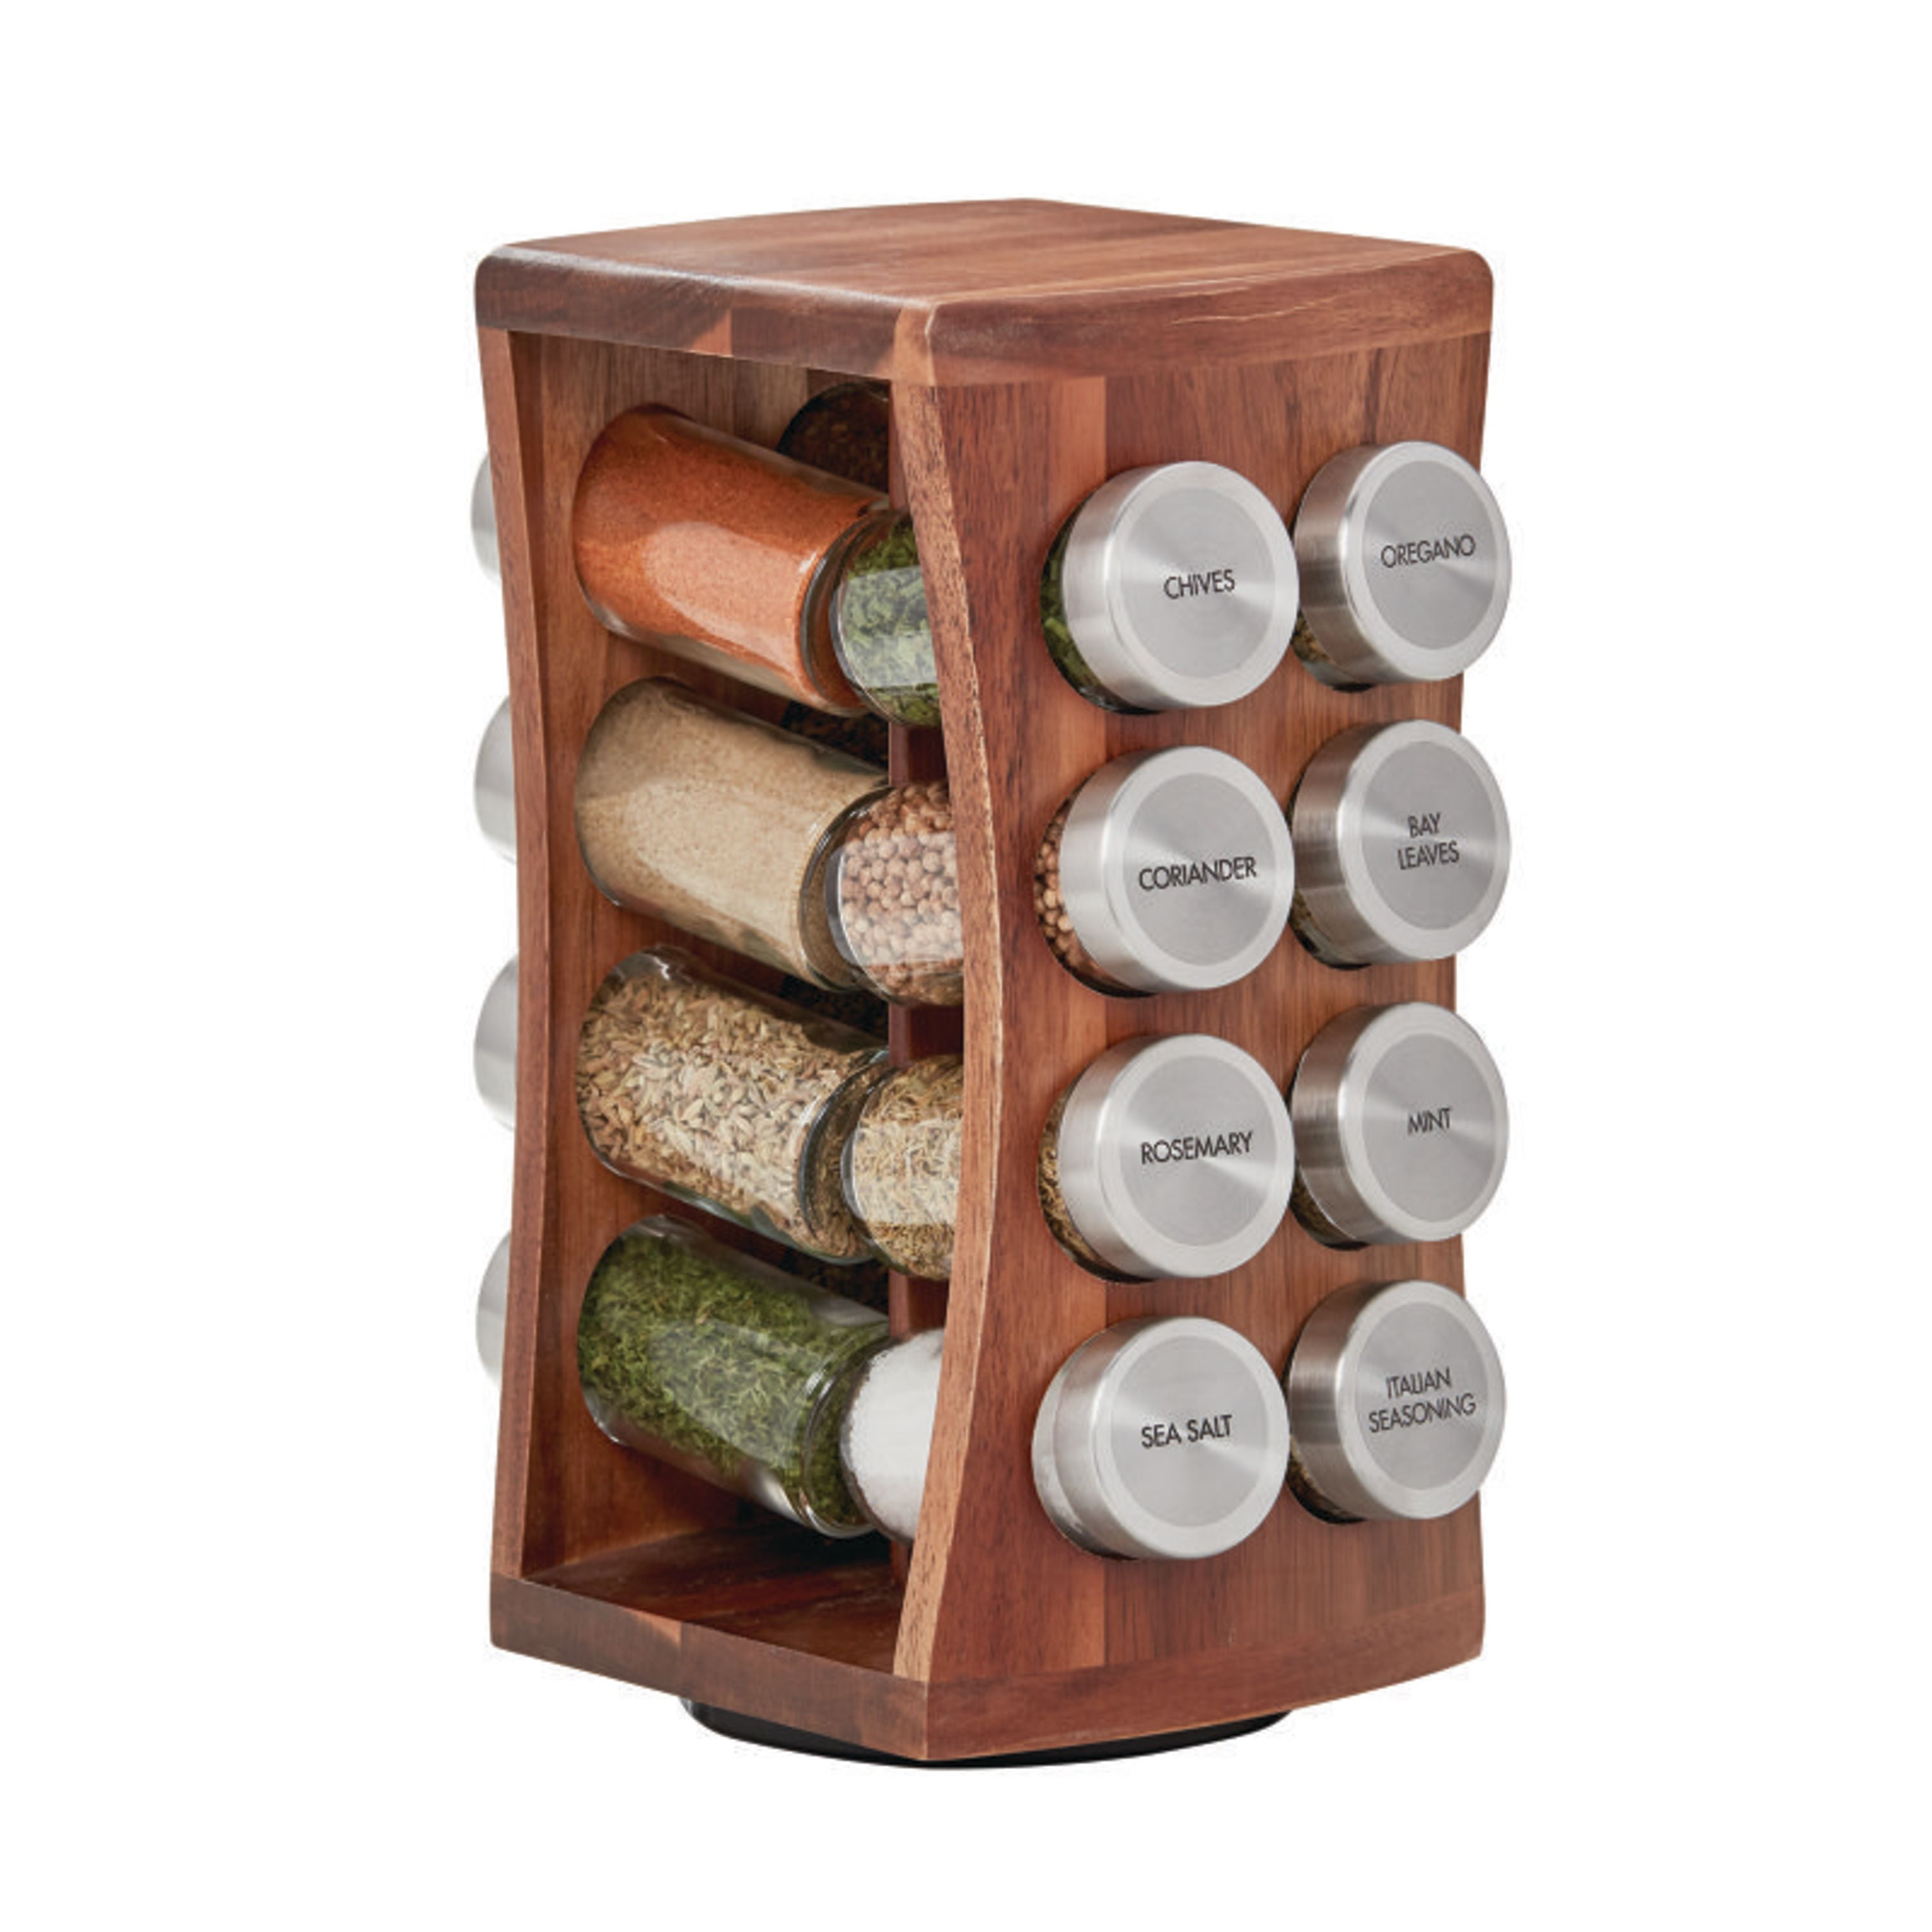 Excello Global Hanging Spice Rack - Includes 35 Glass Spice Jars and  Accessories (Brown) 